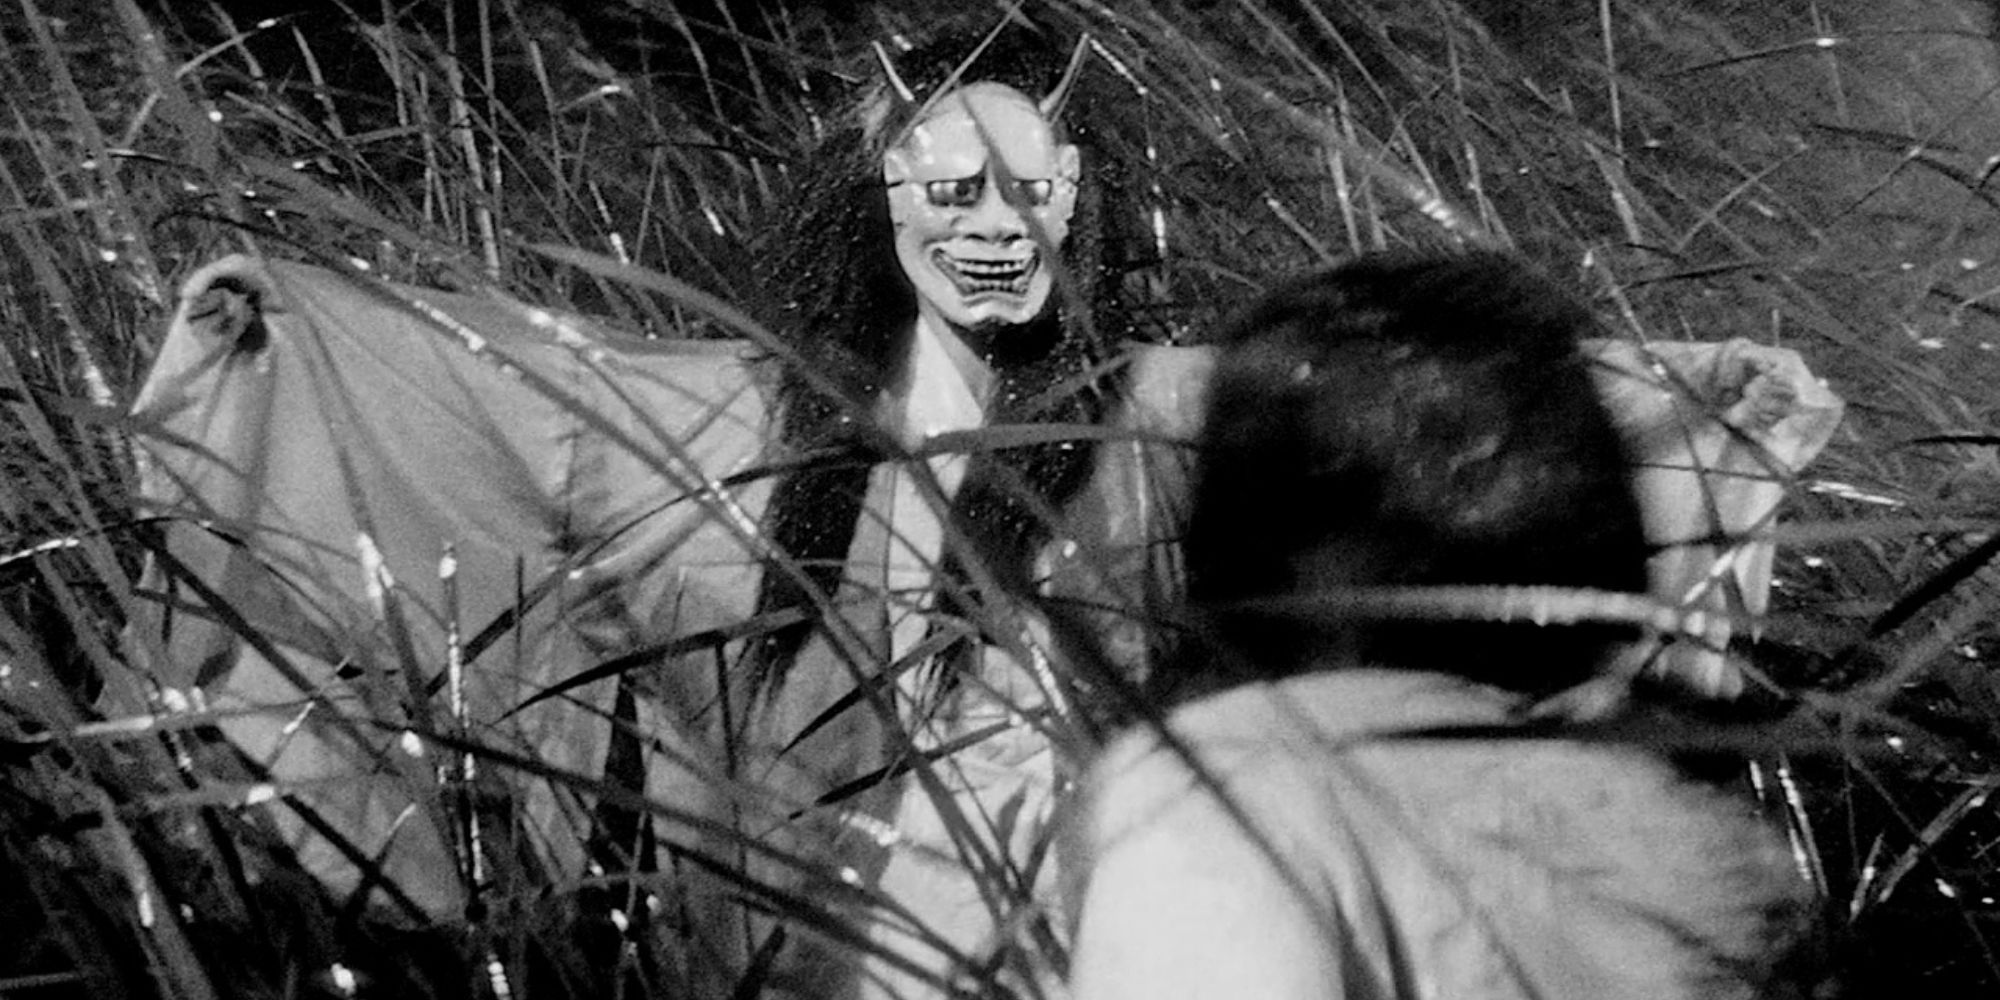 Man in a devil mask standing in front of a girl in a field in Onibaba